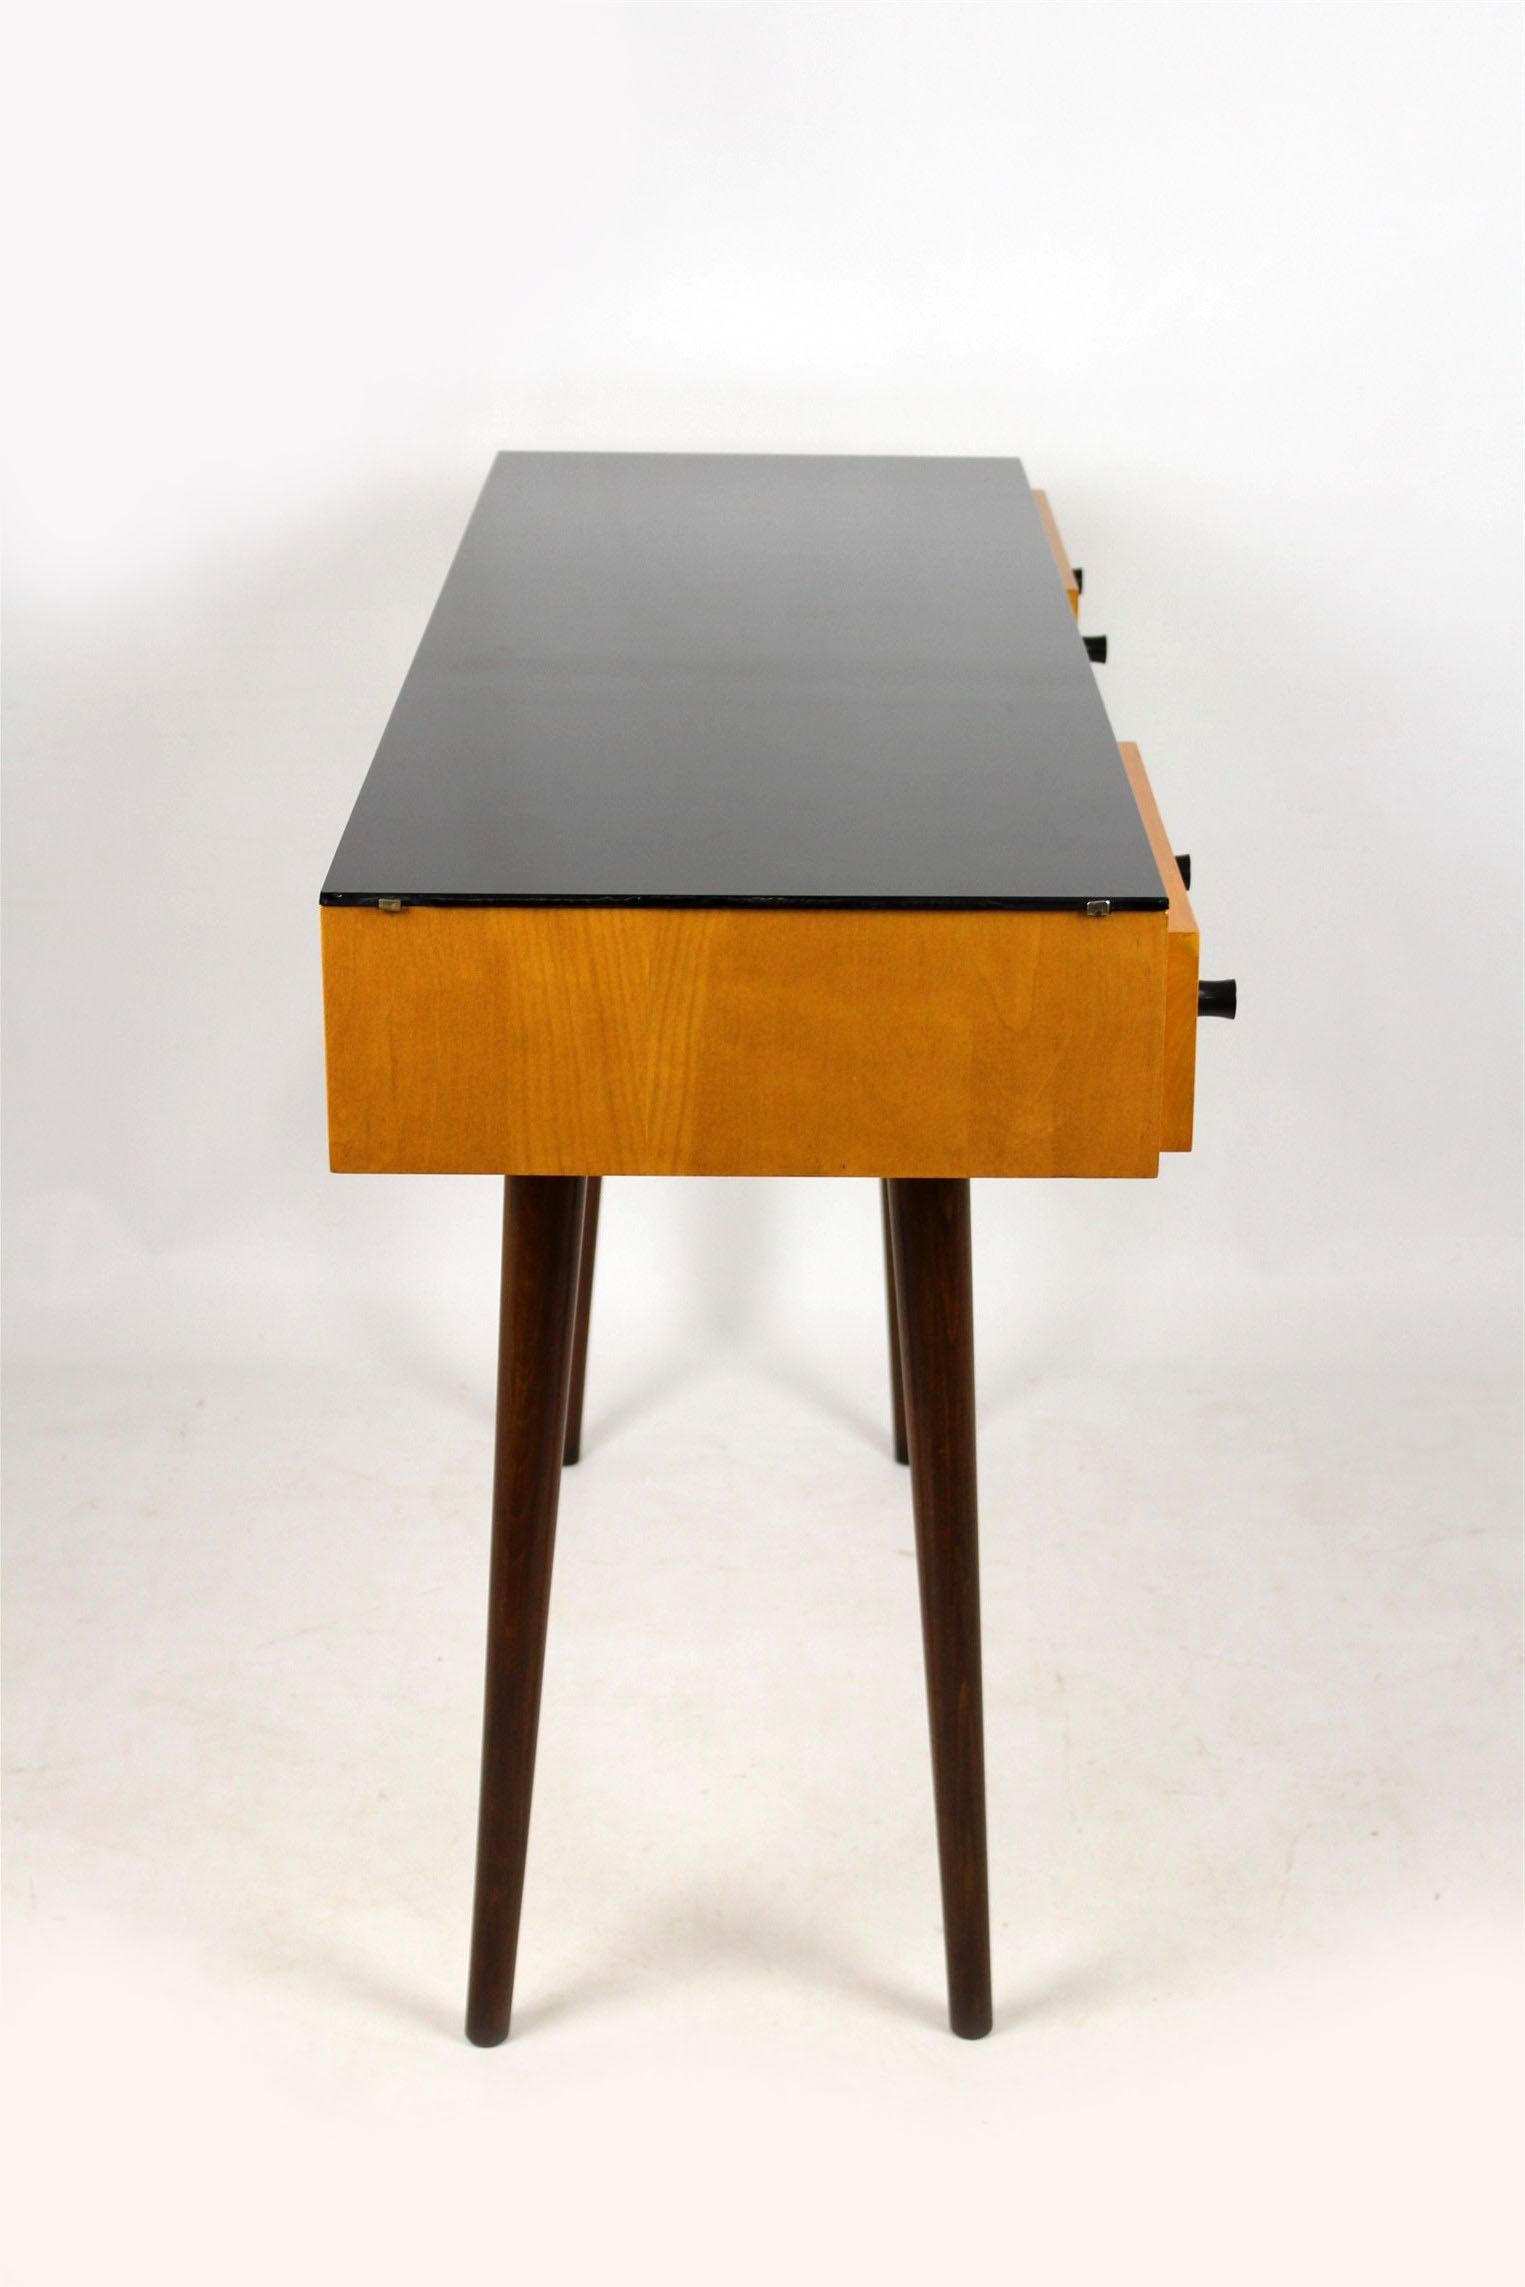 Midcentury Desk or Console Table by M. Požár for Up Bučovice, 1960s 11